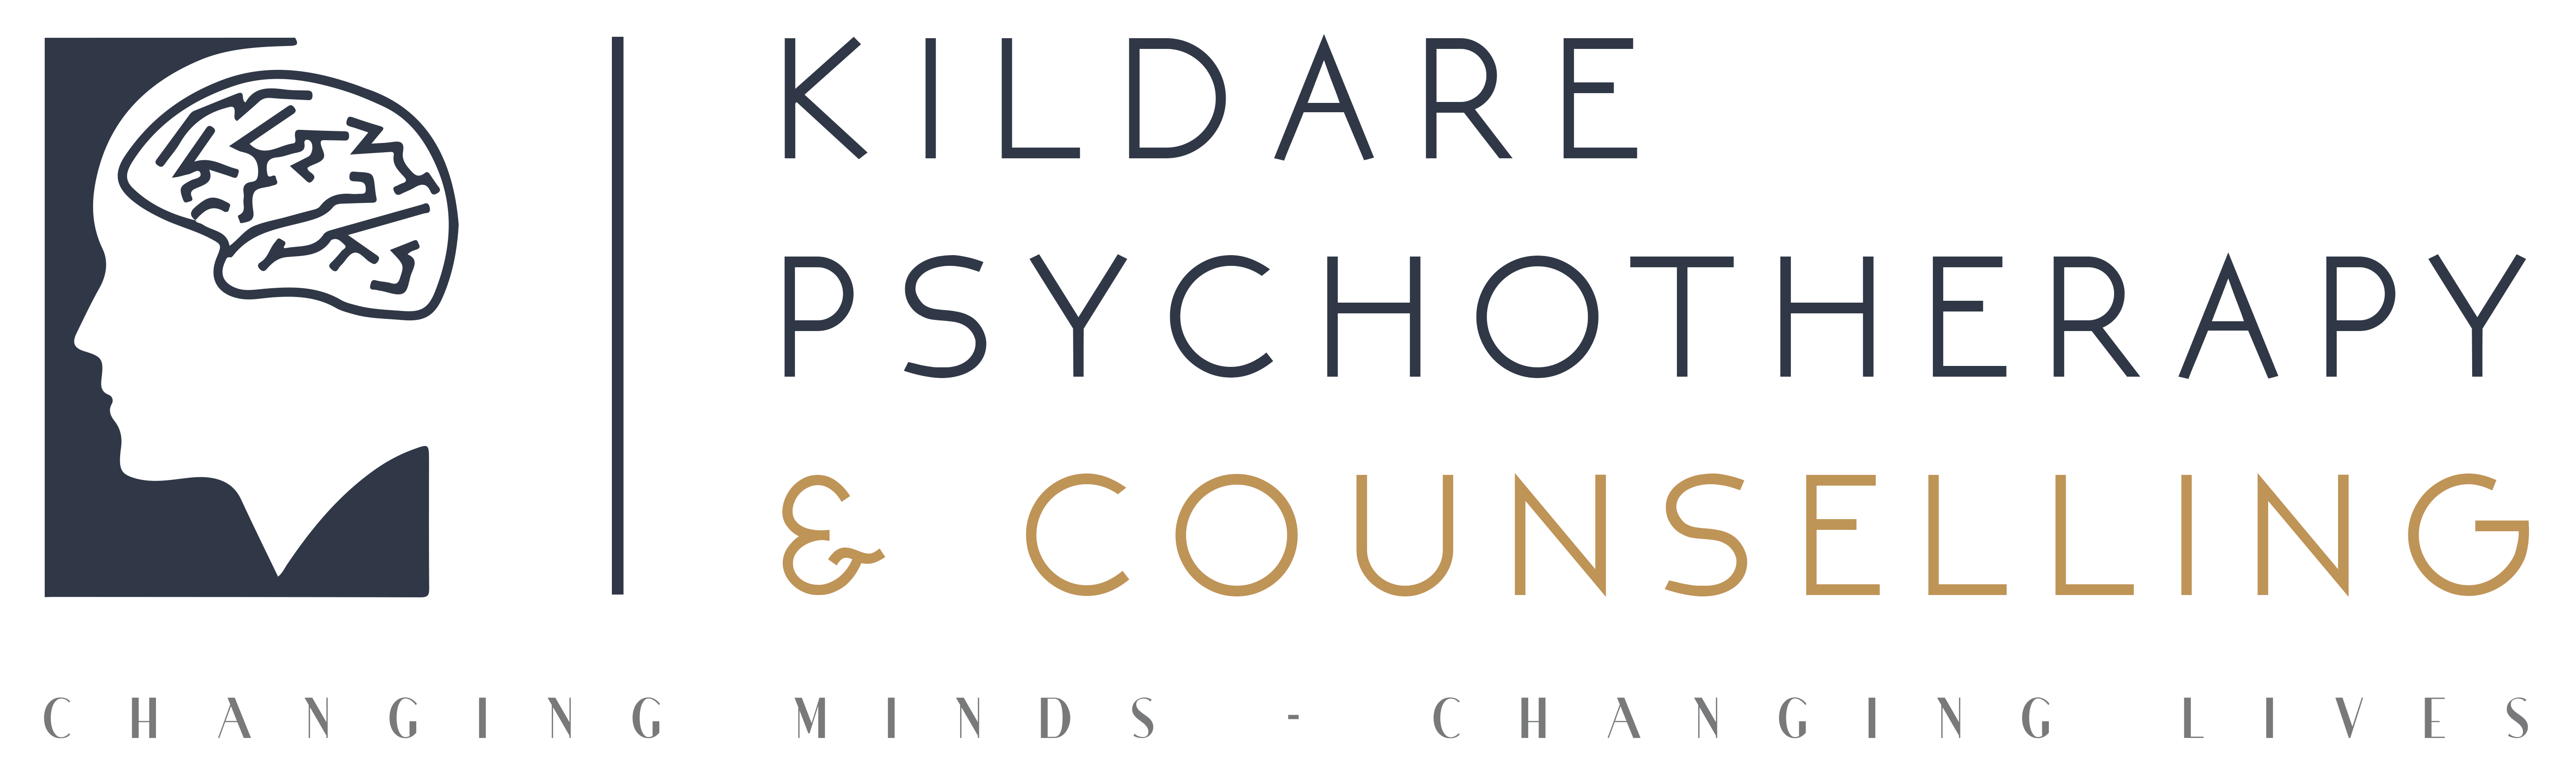 Kildare Psychotherapy & Counselling